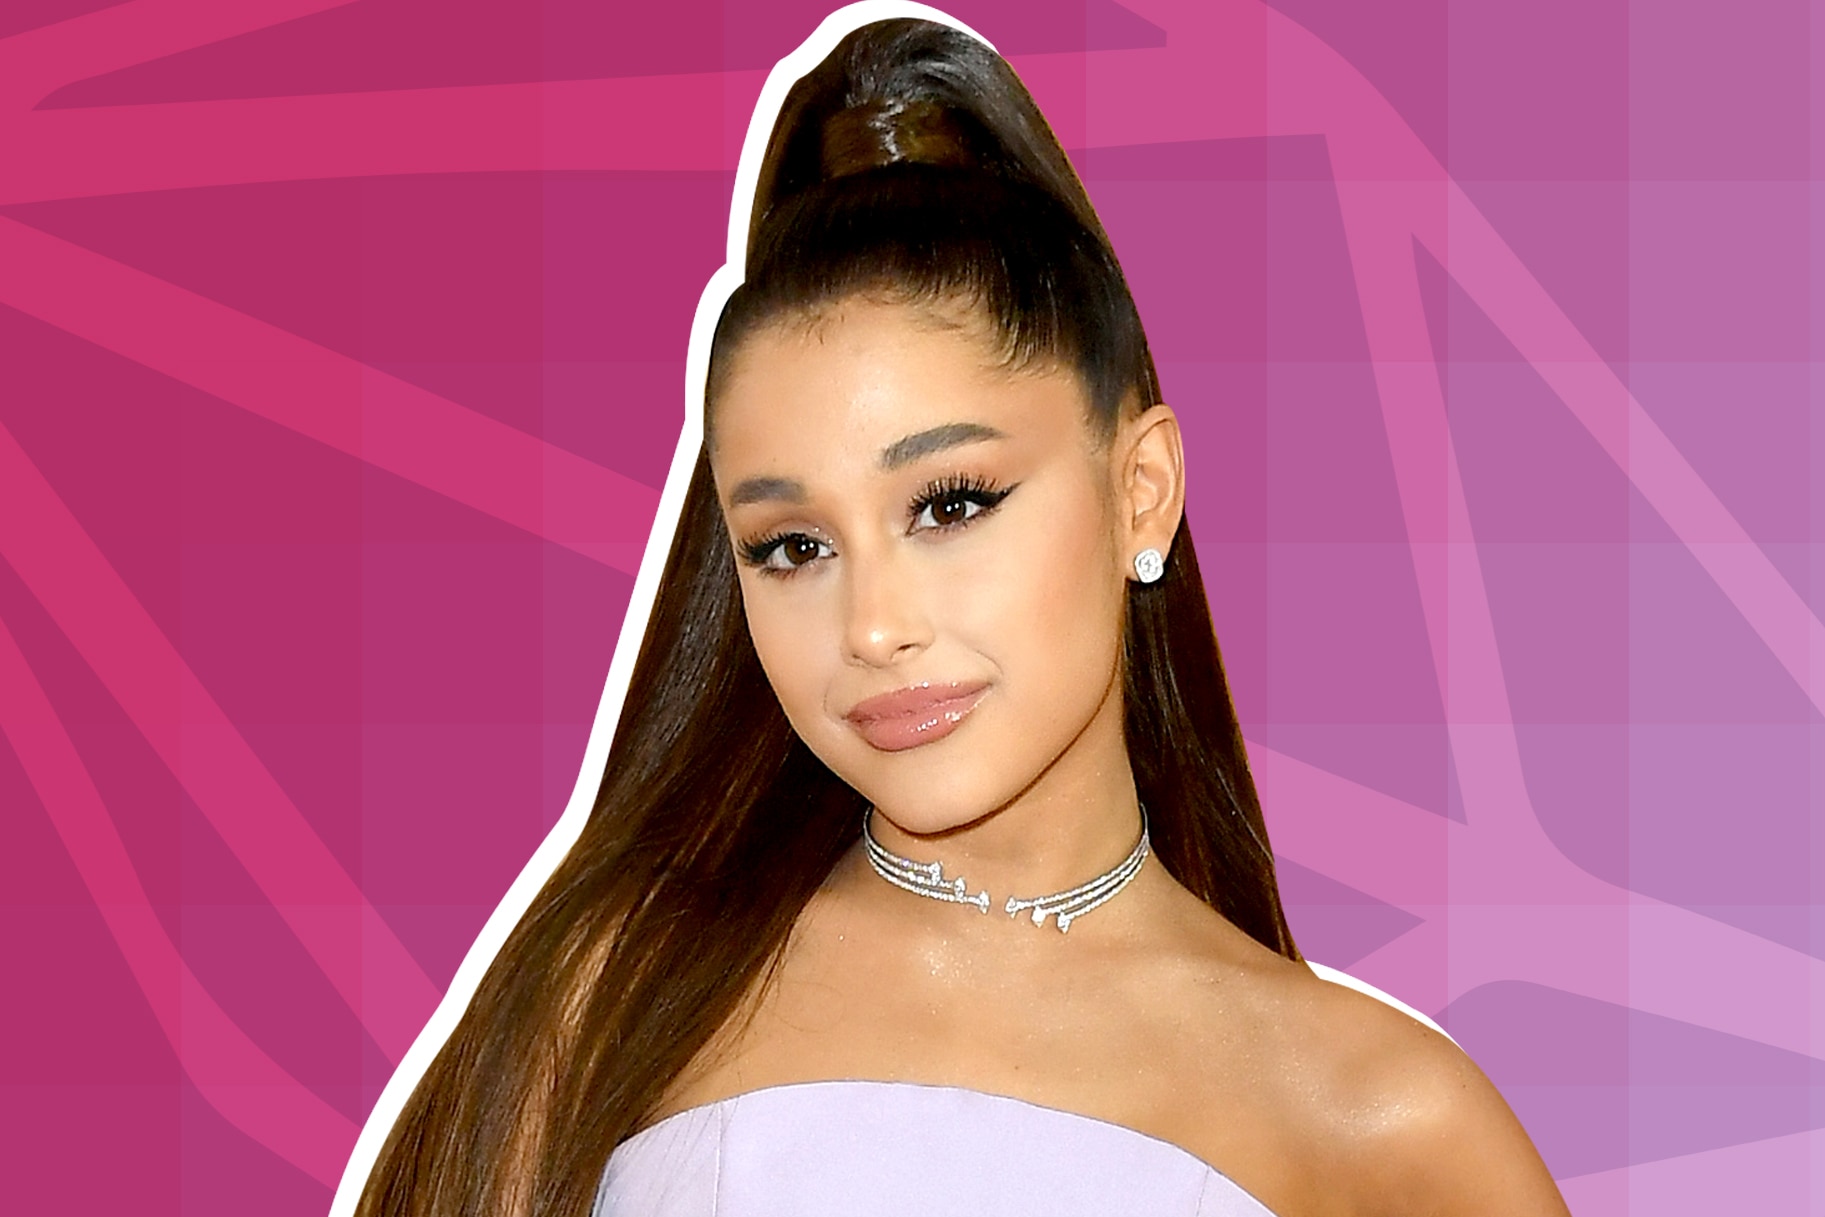 Ariana Grande Tweet Won T Date In 2019 Or Maybe Forever The Daily Dish Born ariana grande butera on 26th june, 1993 in boca raton, florida, usa, she is famous for victorious. bravo tv